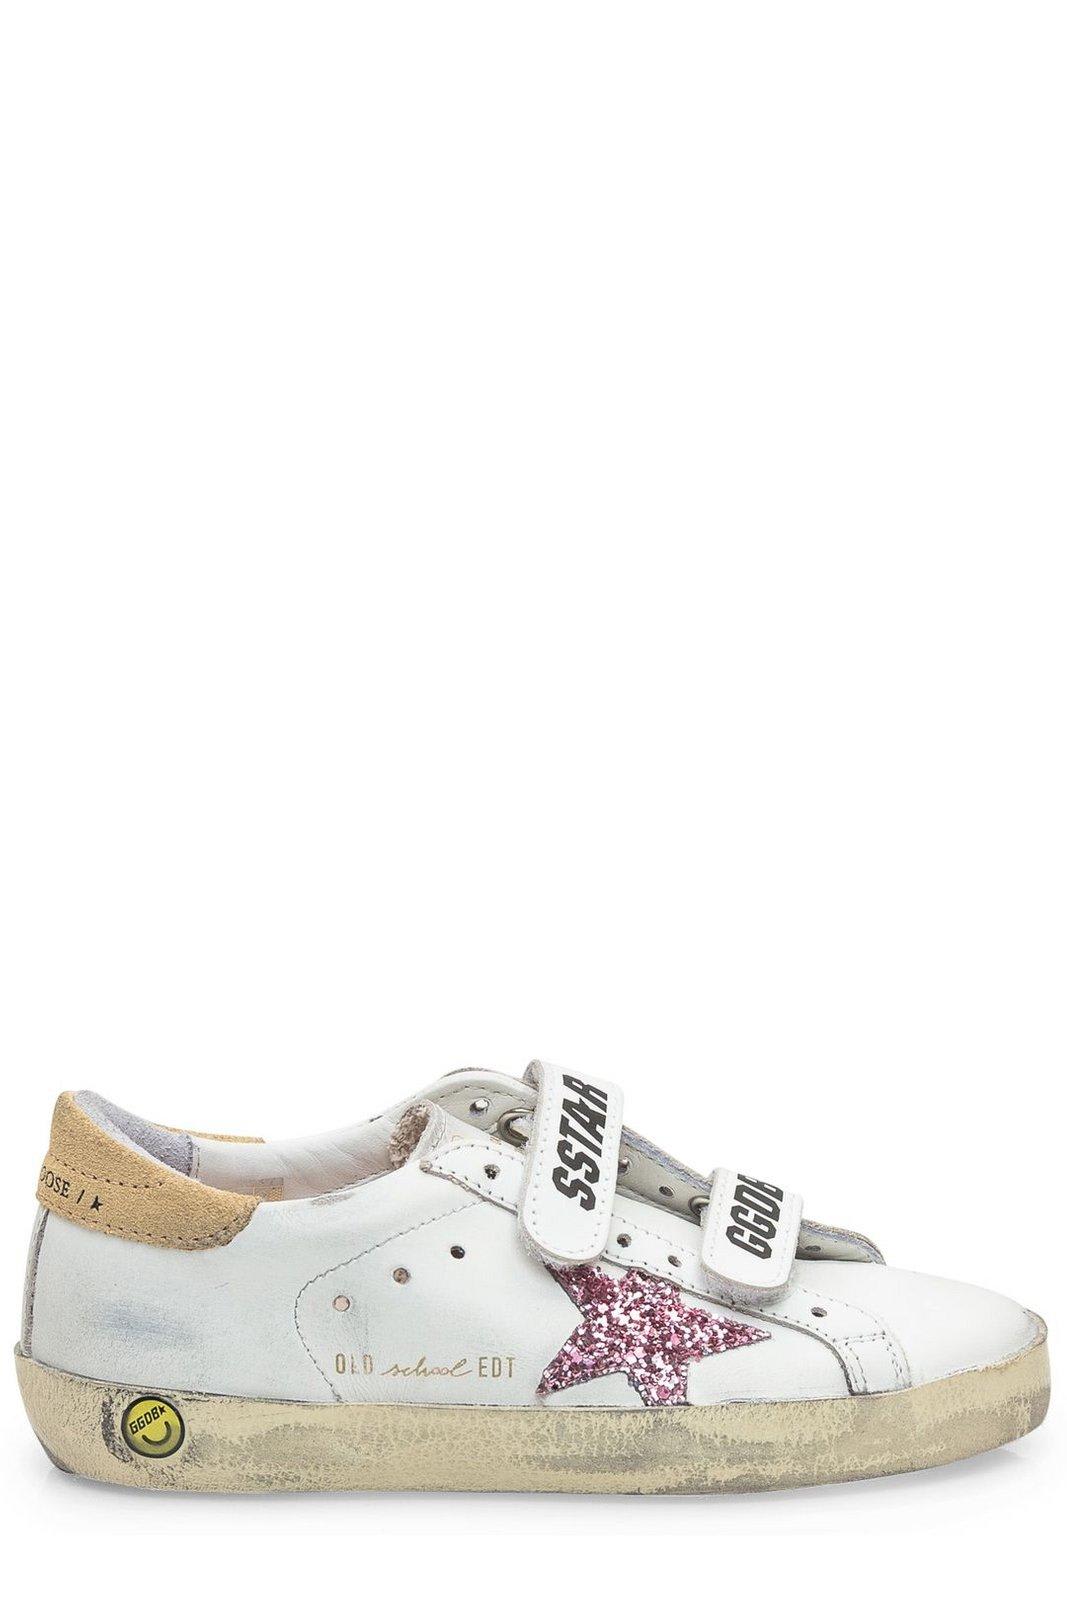 Golden Goose Star Patch Touch-strap Sneakers